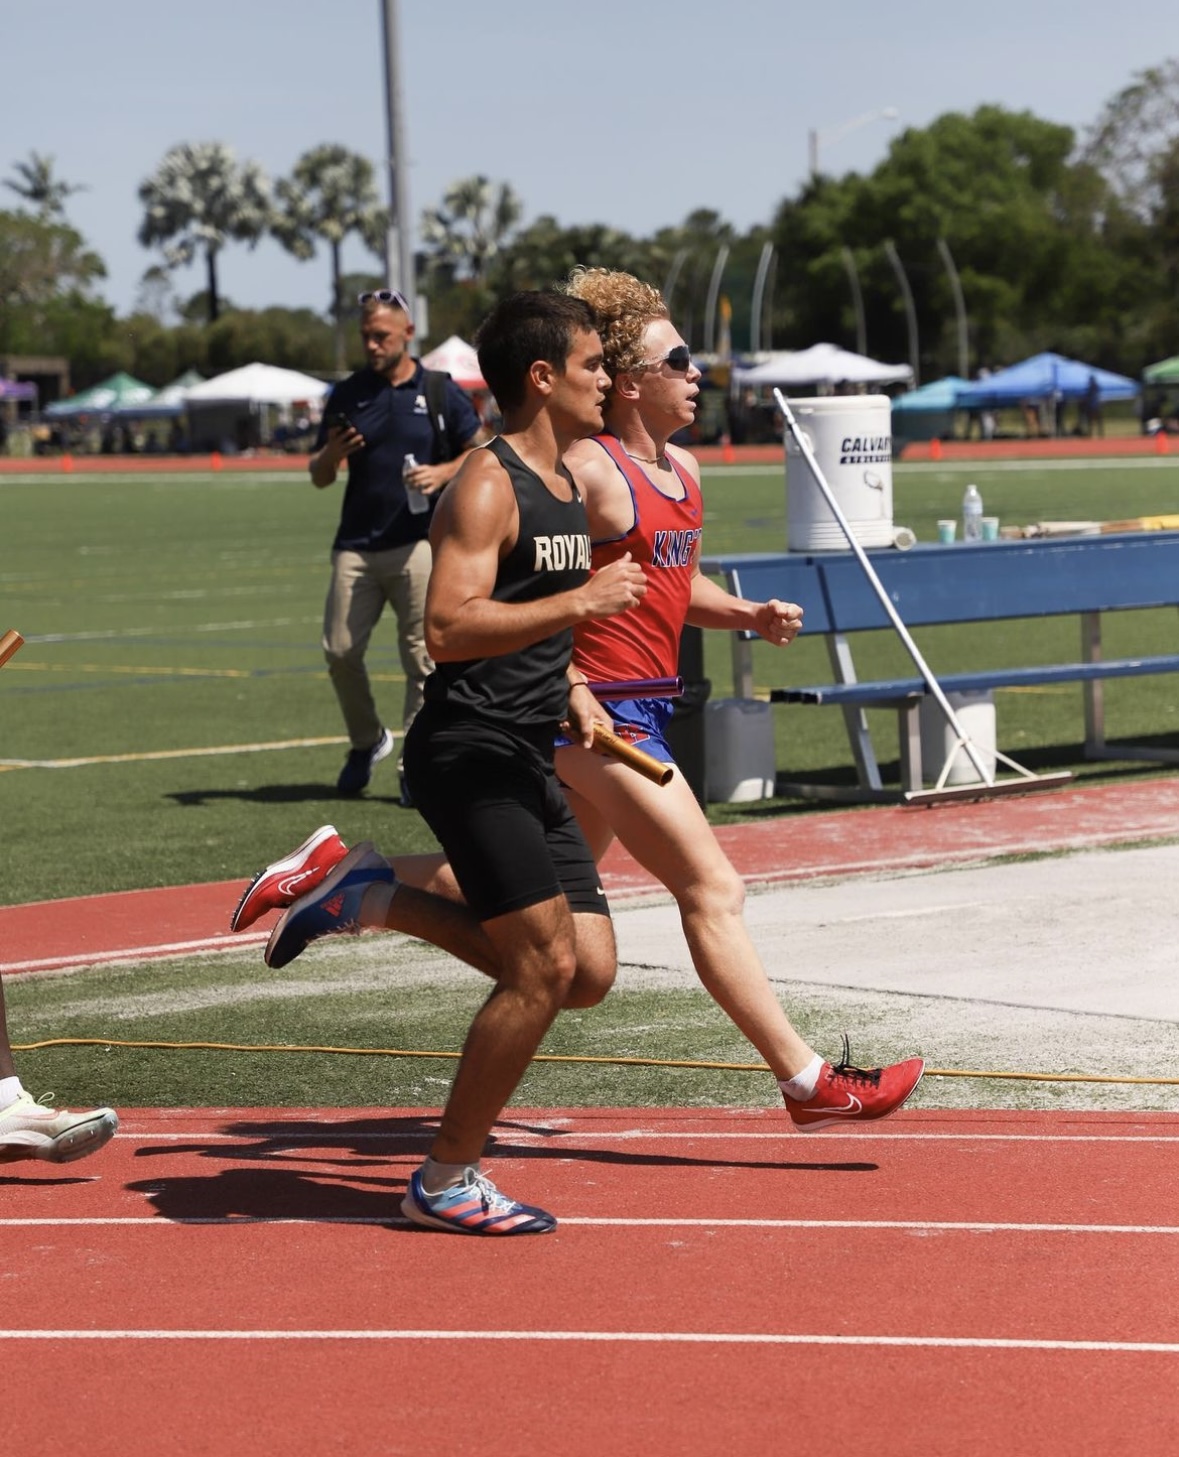 Senior Emmanuel Roca races to the finish line at a Track and Field meet.
Courtesy: ILS Instagram